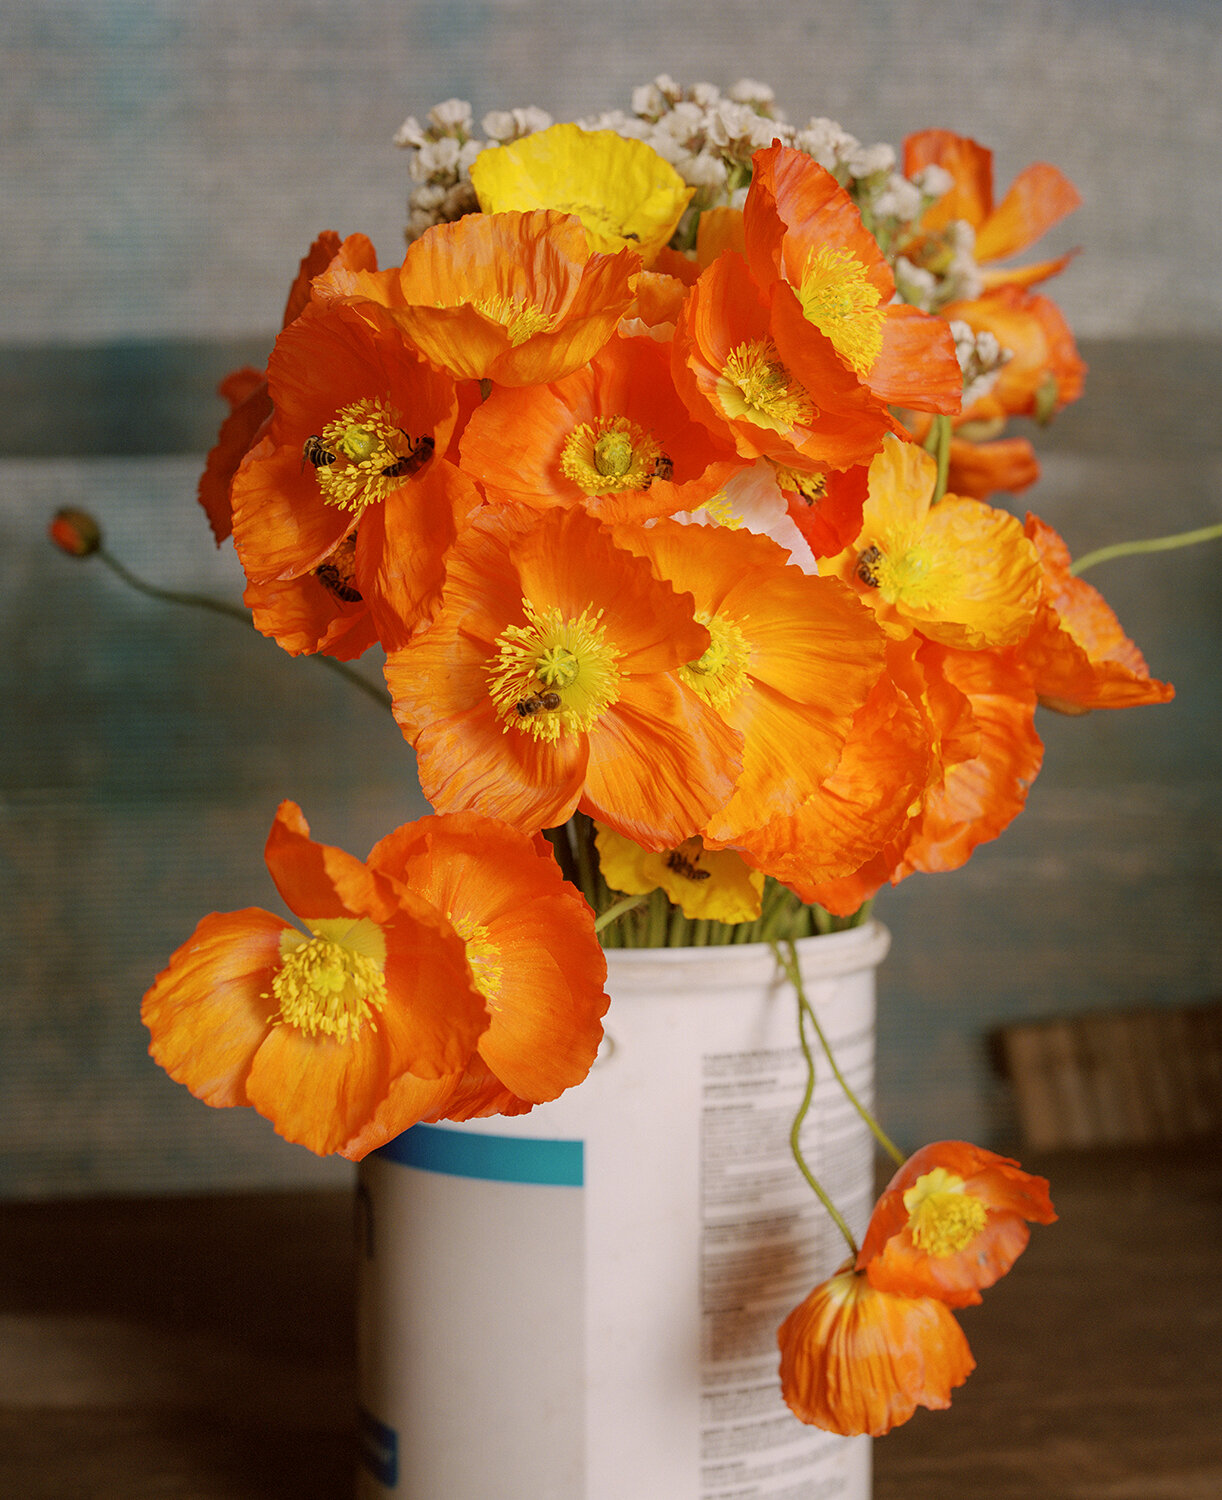  Conversations with Bees  This image of the poppies in the bucket is reminiscent of colonial Dutch paintings, but instead of the flowers being in an ornate vase they are in a plastic paint bucket. The poppies represent Constantia as a place of transn